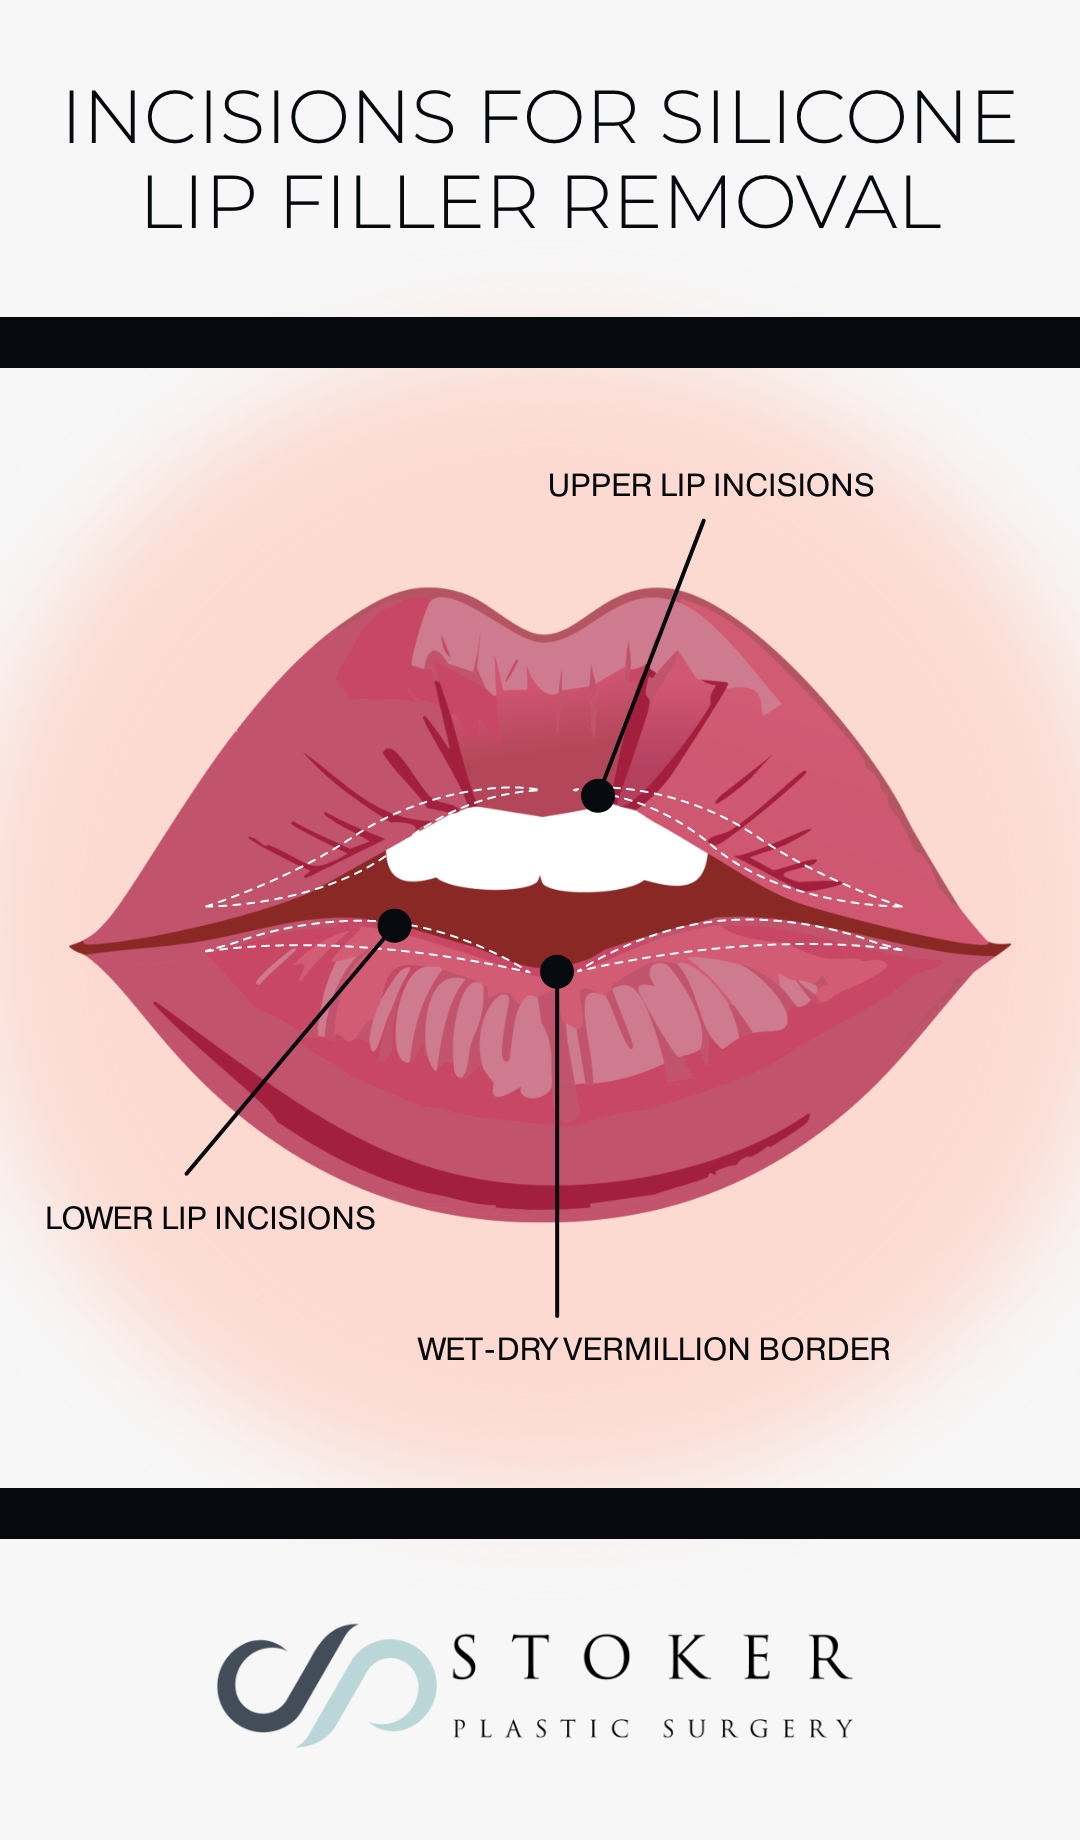 Infographic showcasing incision areas for silicone lip filler removal